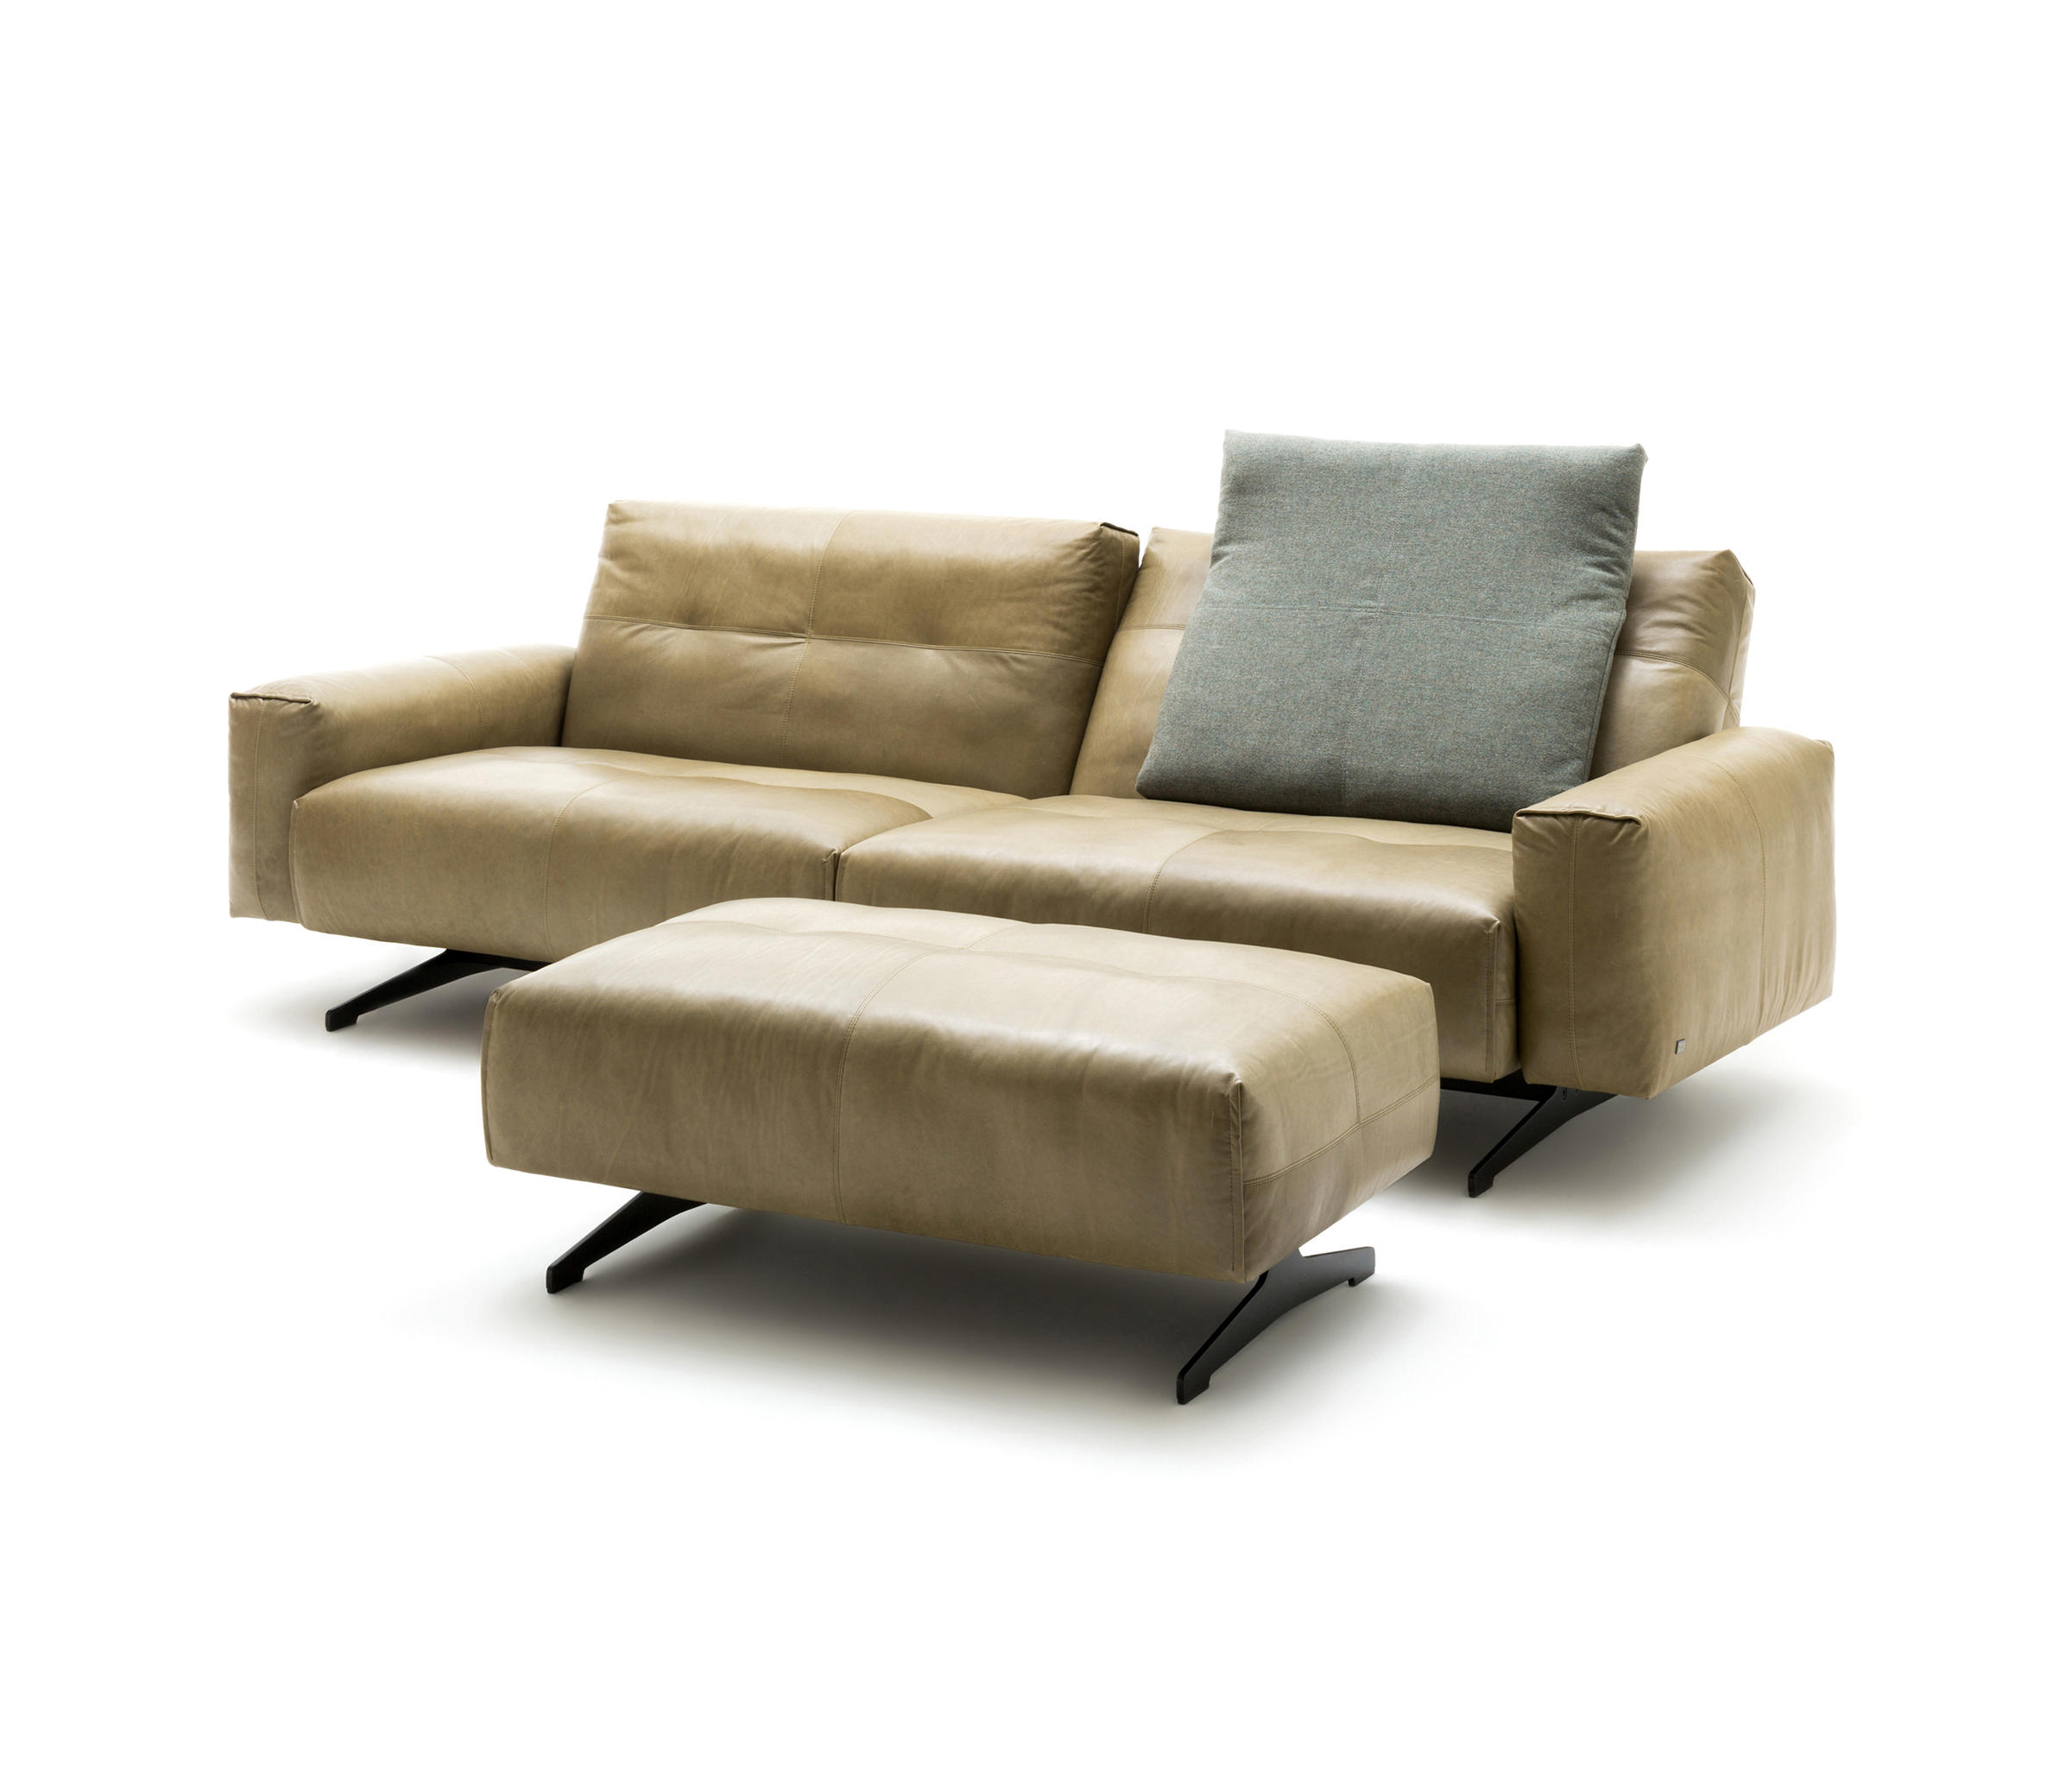 ROLF BENZ - Sofas Rolf Benz | Architonic